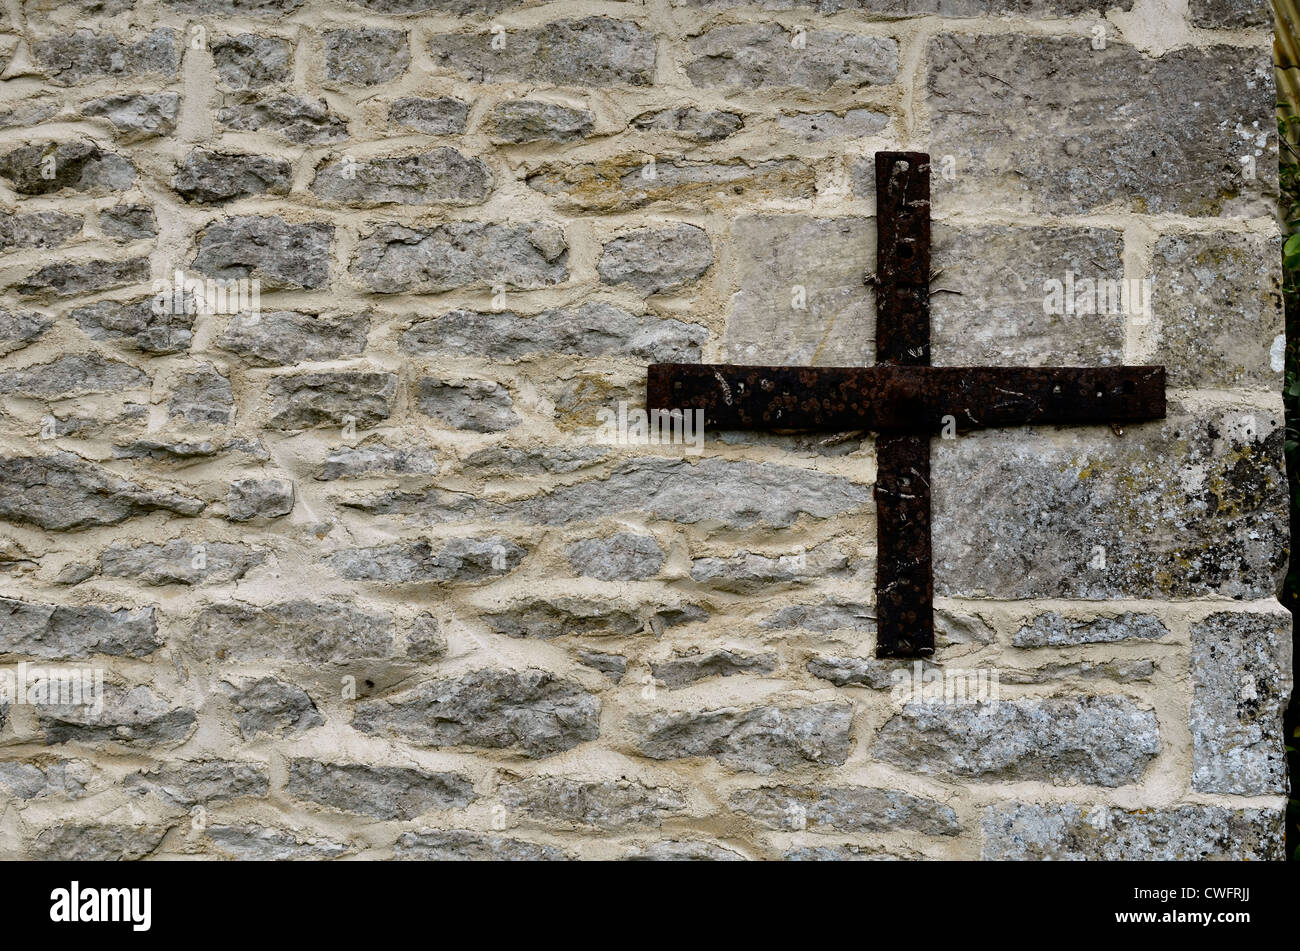 Denial of access, security. Stone building wall / detail of weathered stonework with reinforcing strapping - western Wiltshire Stock Photo